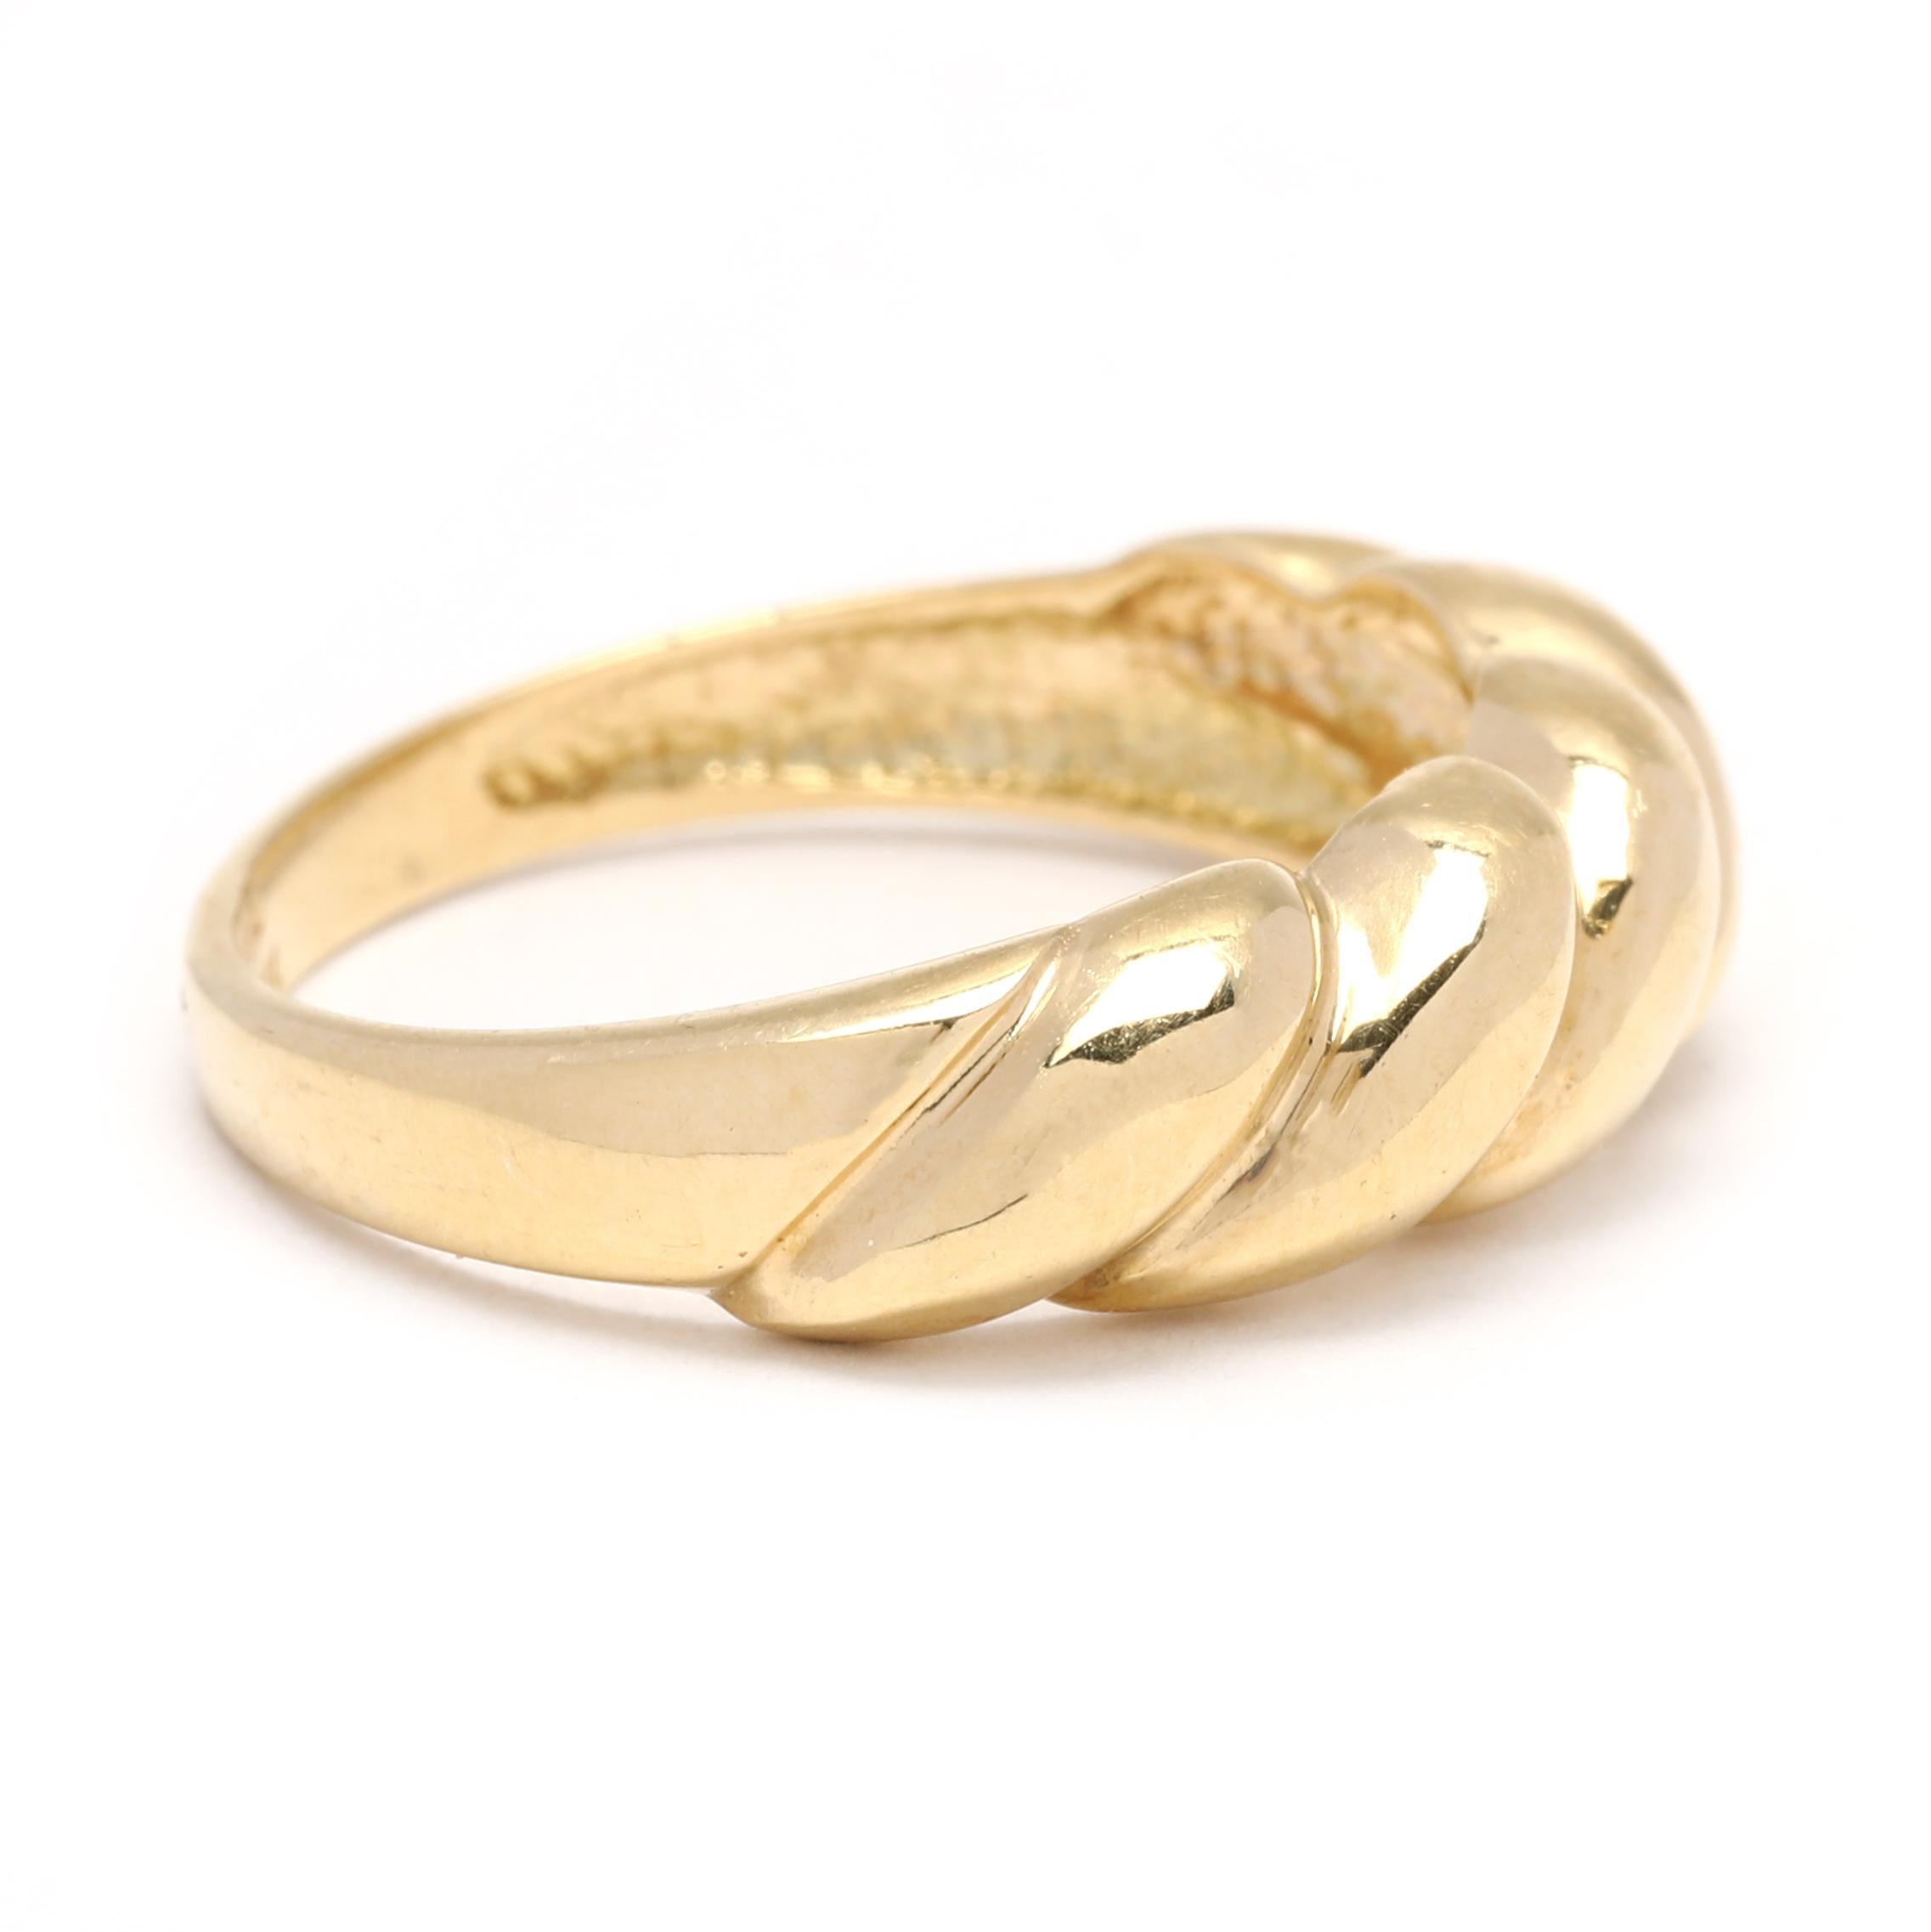 This 18K yellow gold croissant ring is the perfect addition to any stackable jewelry collection. Featuring a thin domed band for a delicate look, the ring is a size 7 and can easily be dressed up or down. With its unique design, this gold croissant